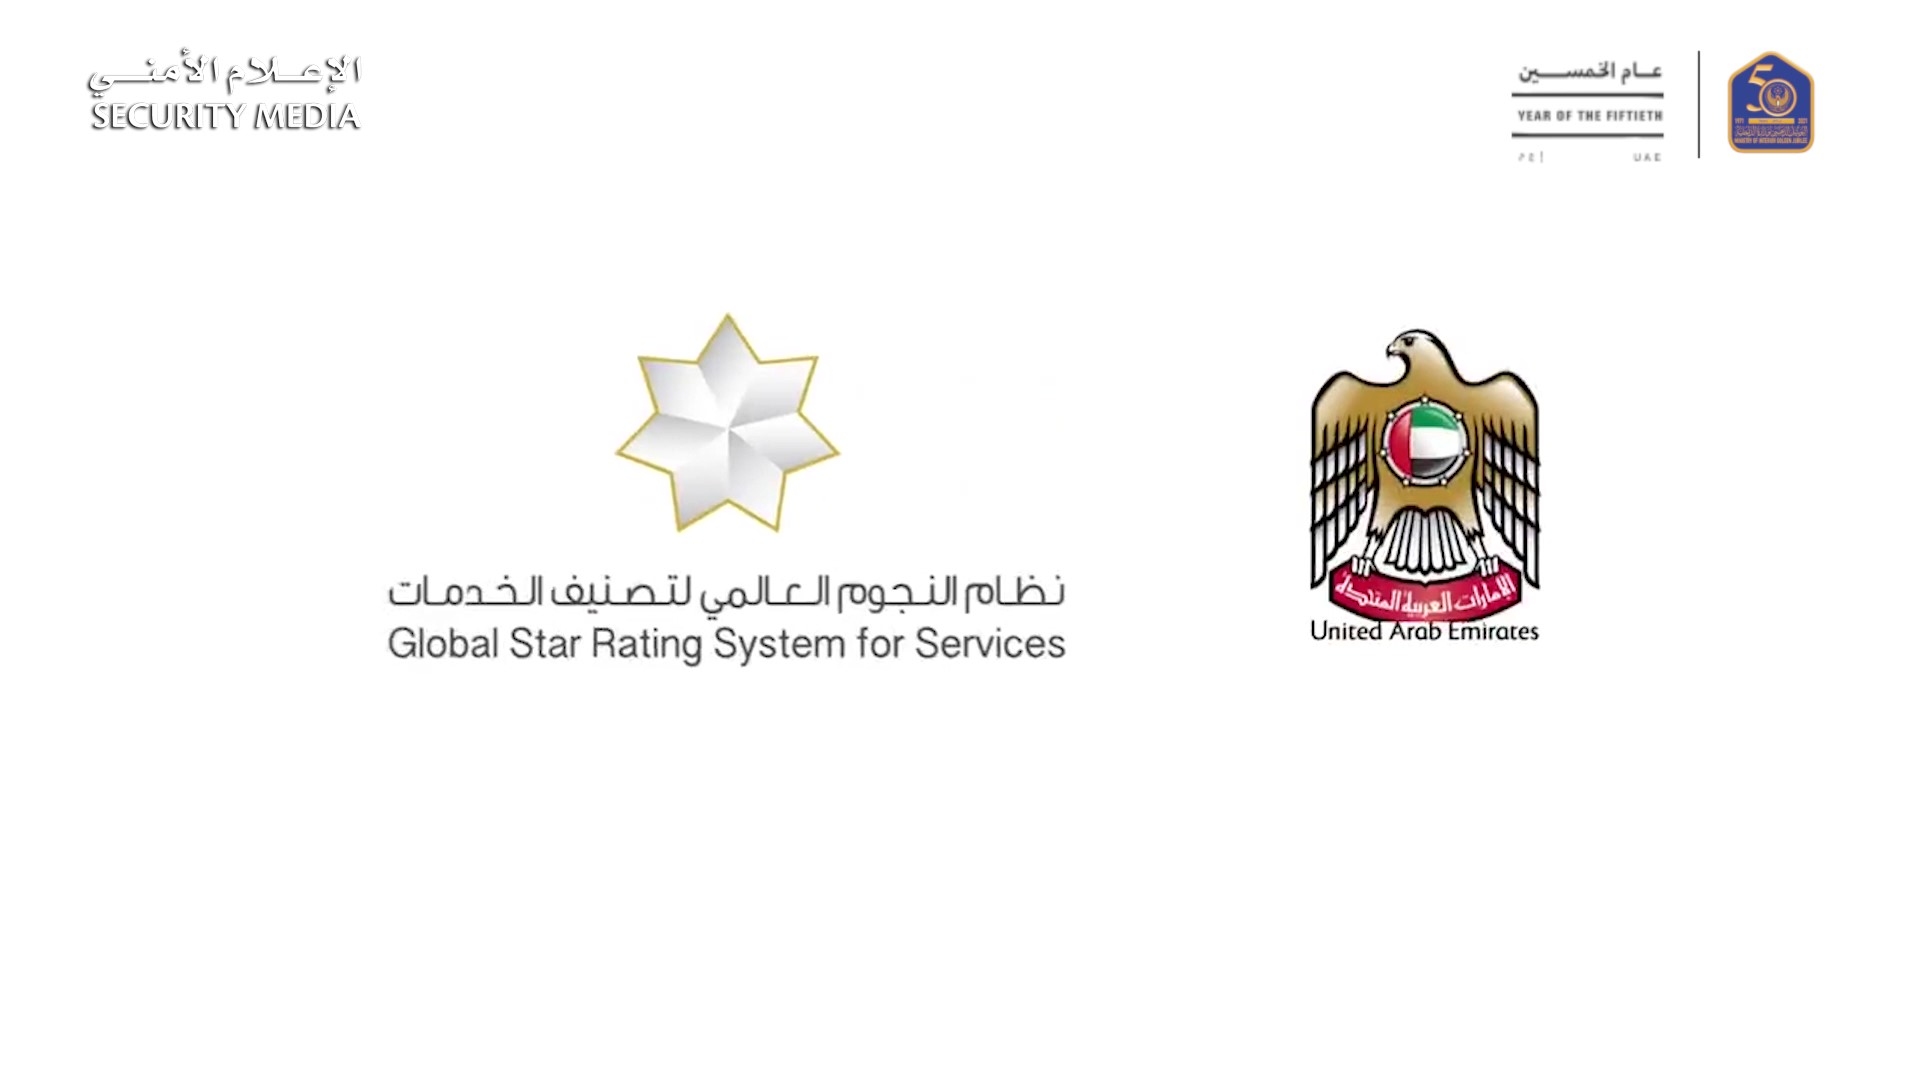 MOI comes to a new achievement in evaluating service centers under global star rating system for services